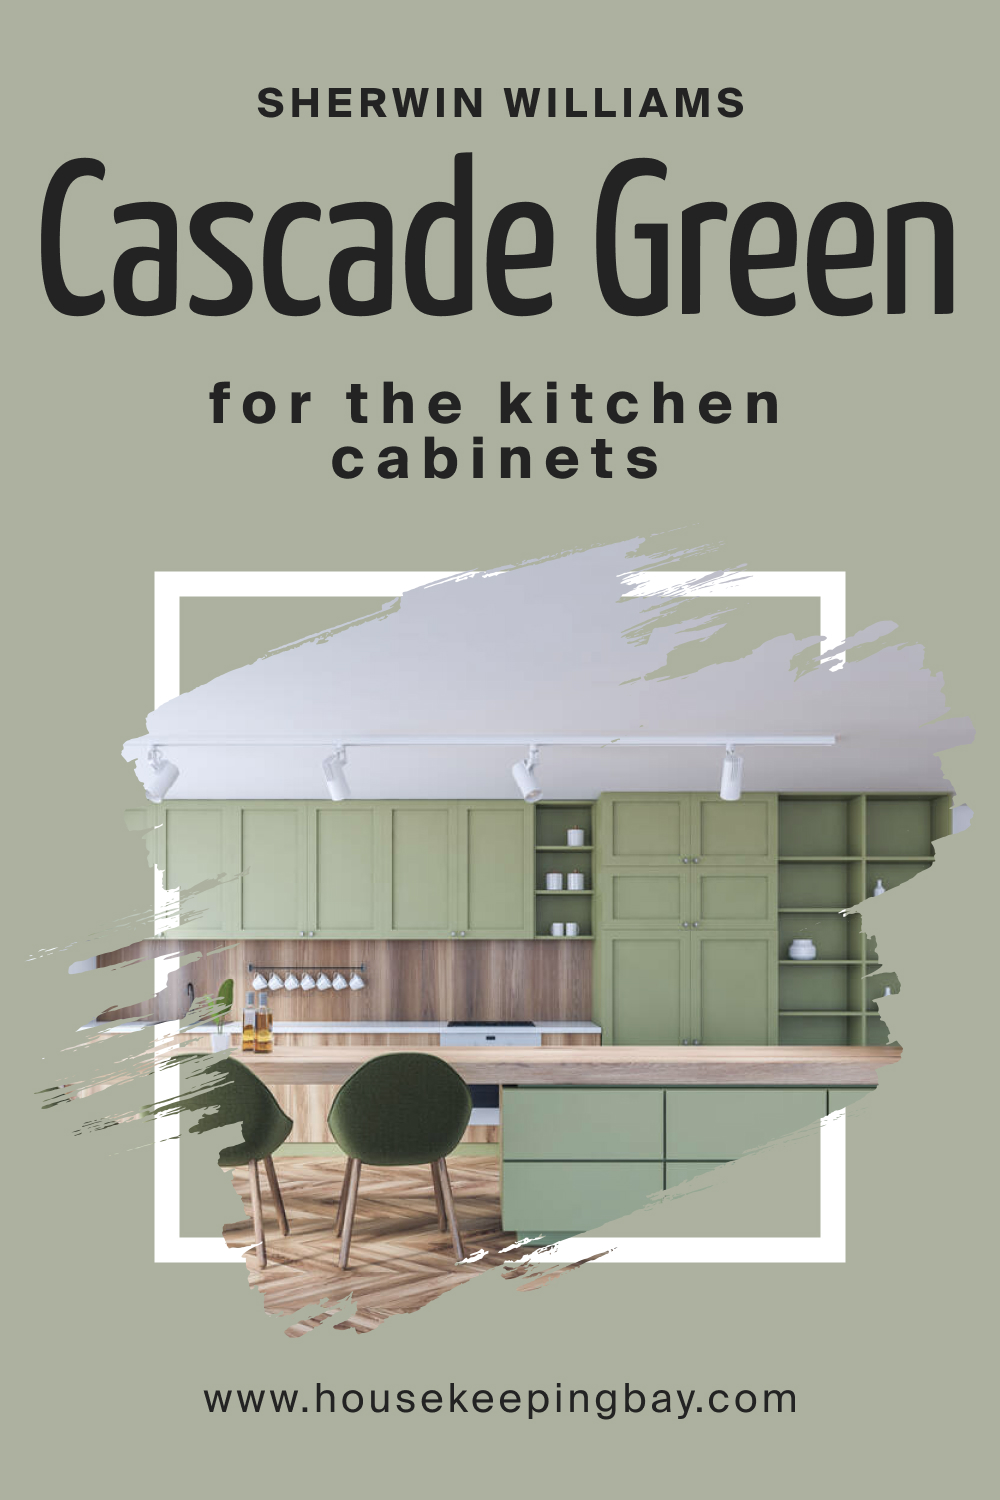 Sherwin Williams. SW 0066 Cascade Green For the Kitchen Cabinets